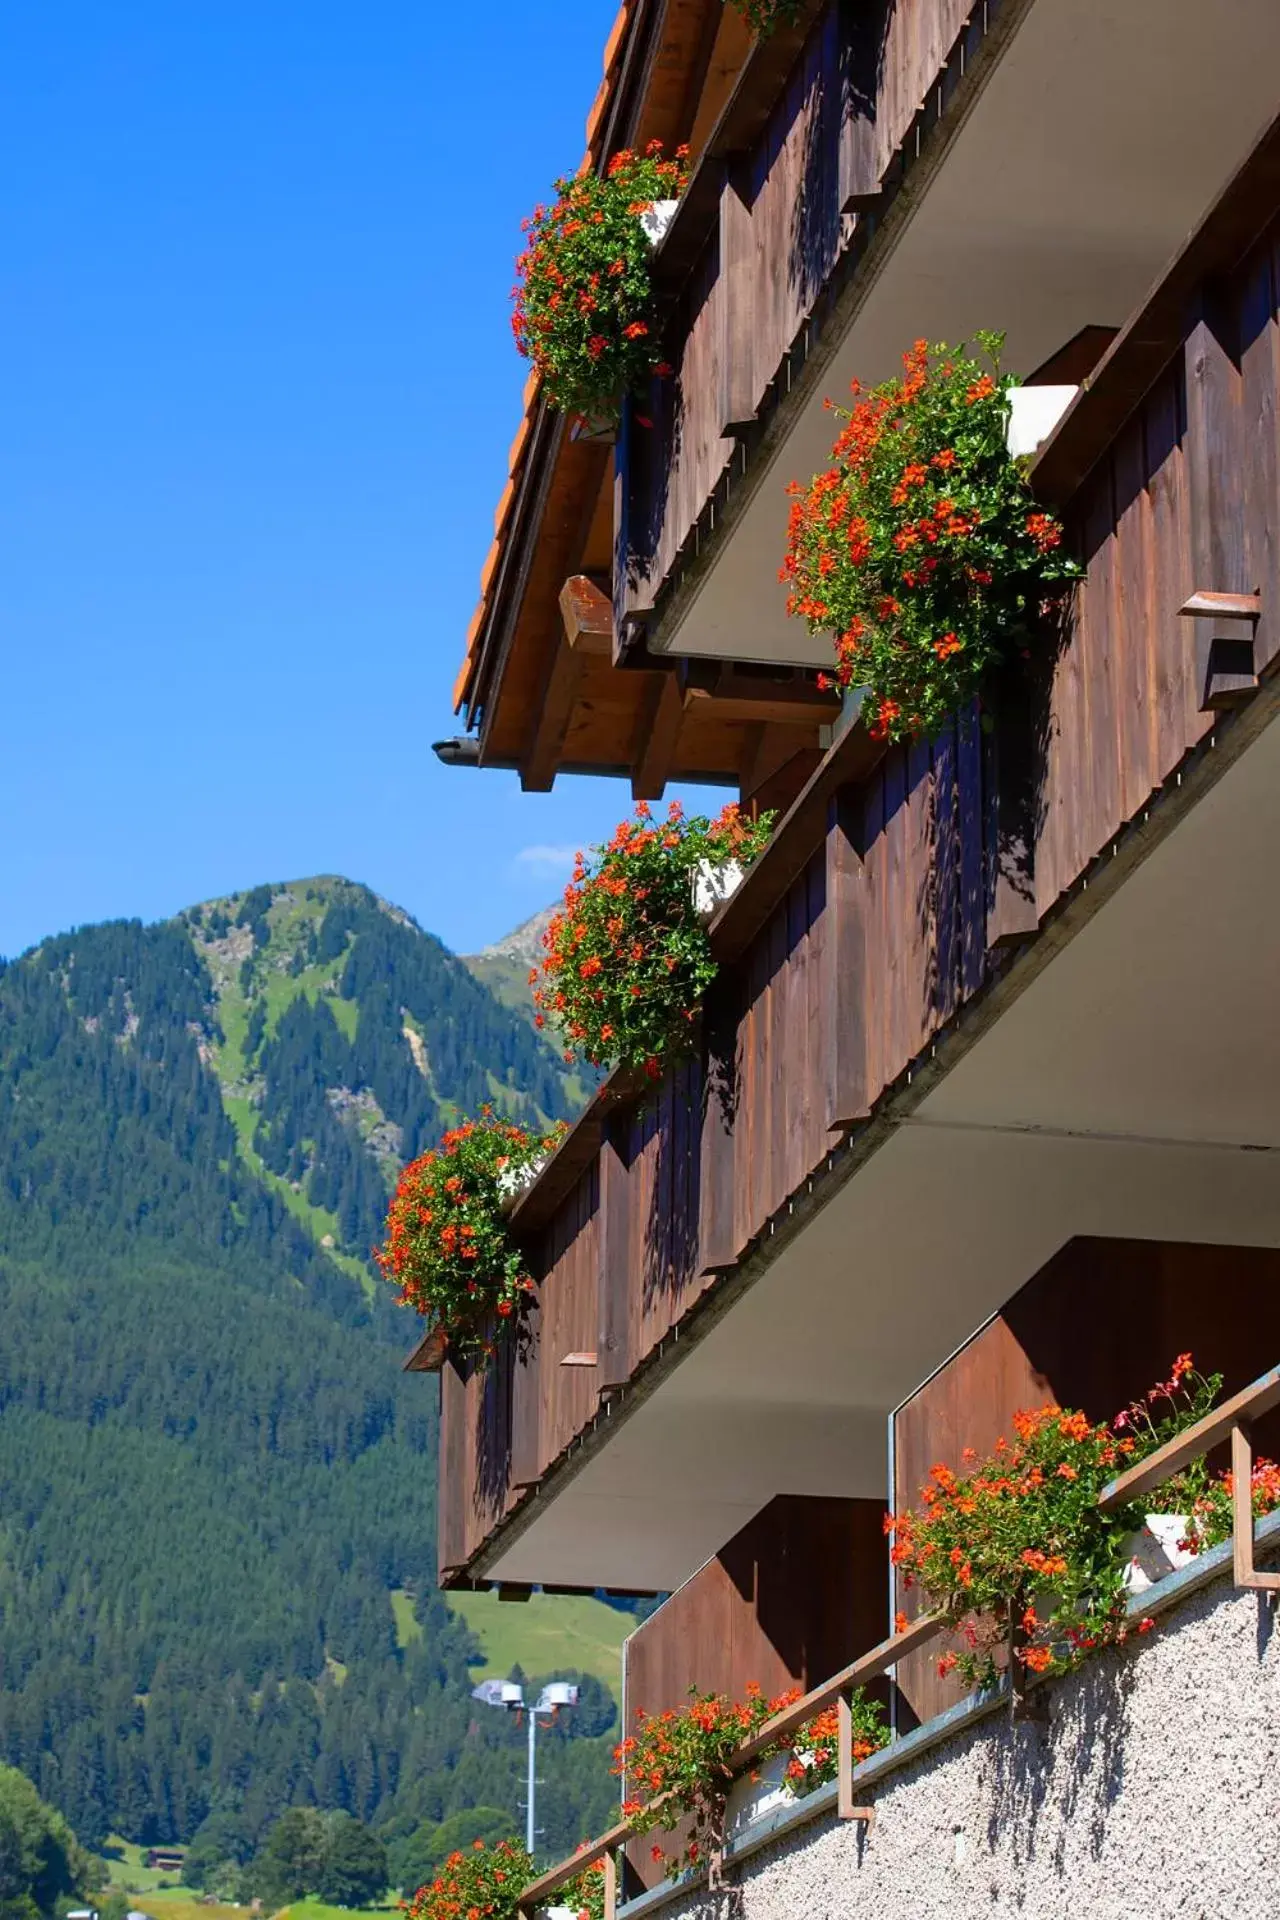 Property Building in Sport-Lodge Klosters